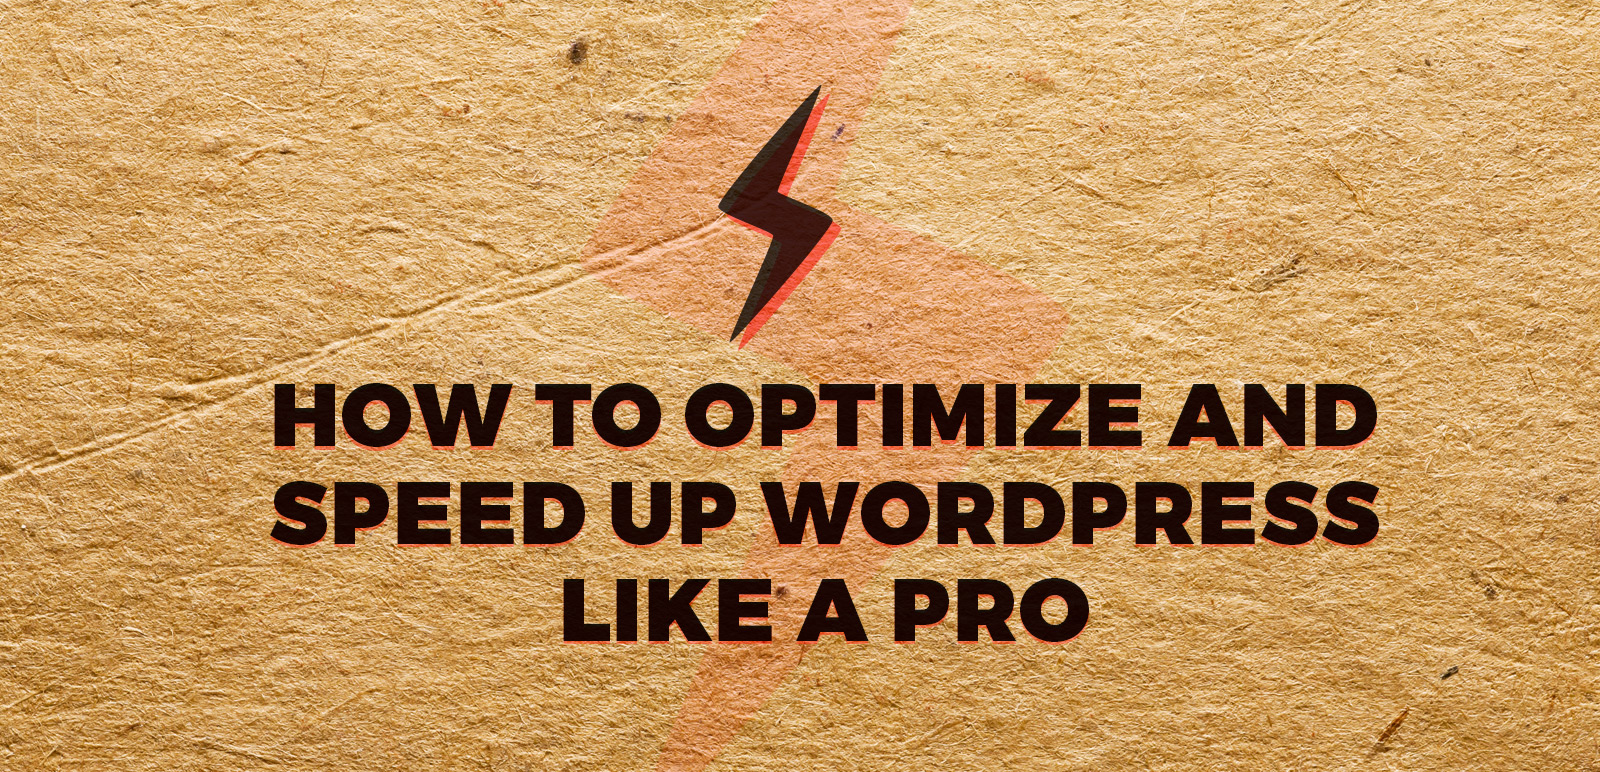 How to optimise and speed up WordPress like a pro - Pixel Kicks